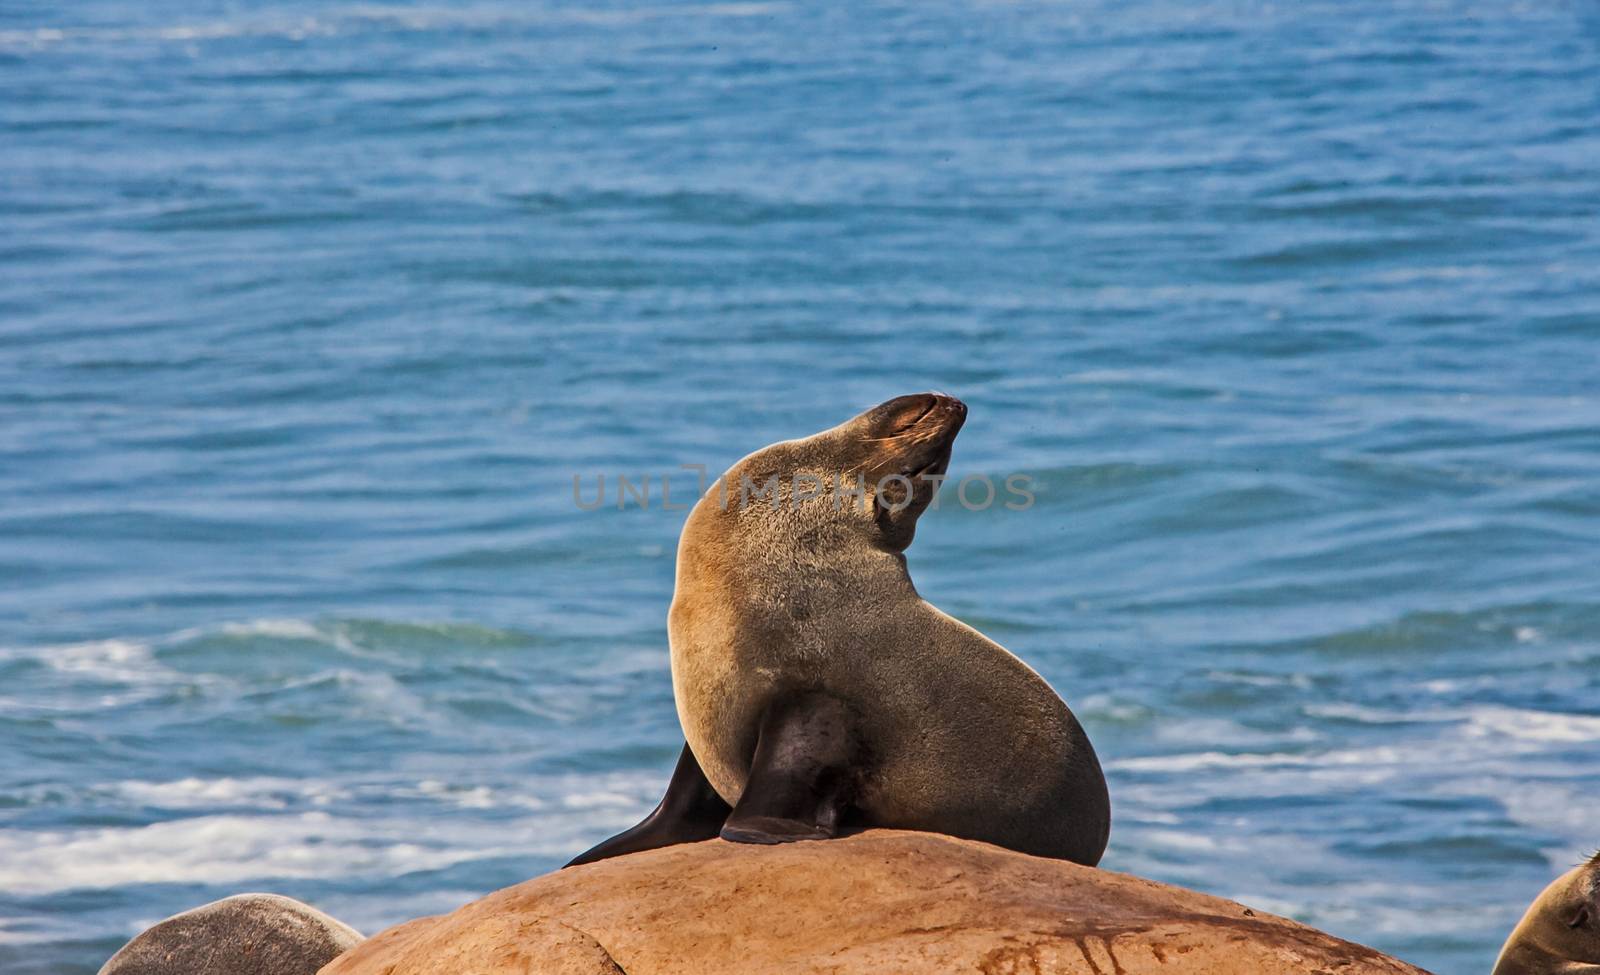 Cape Fur Seal (Arctocephalus pusillus), also known as Brown Fur Seal, on the Atlantic Coast of South Africa in the Namaqua National Park.